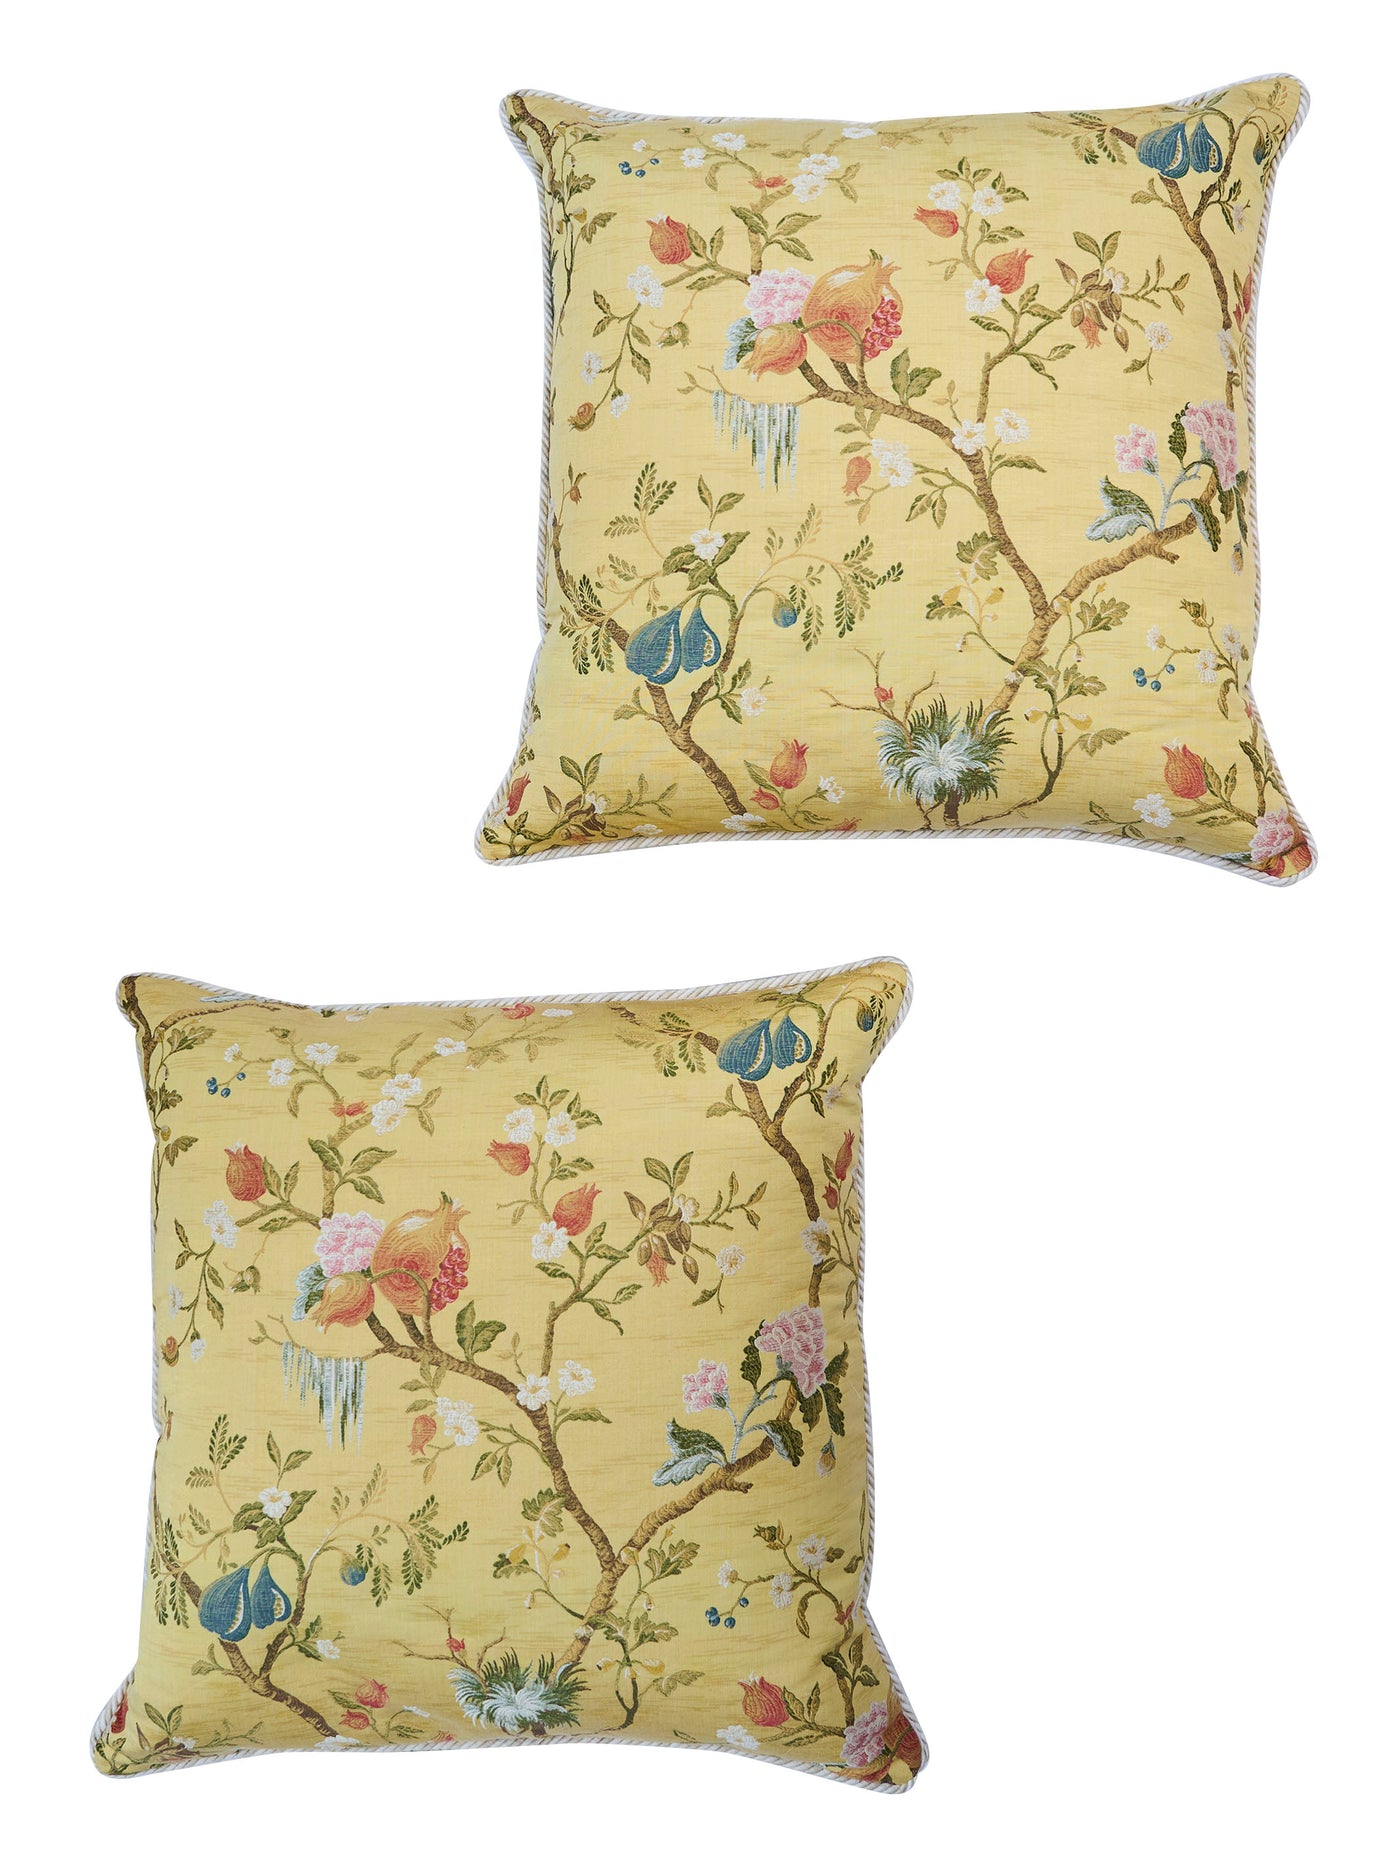 Pair of Ornate Floral Throw Pillows